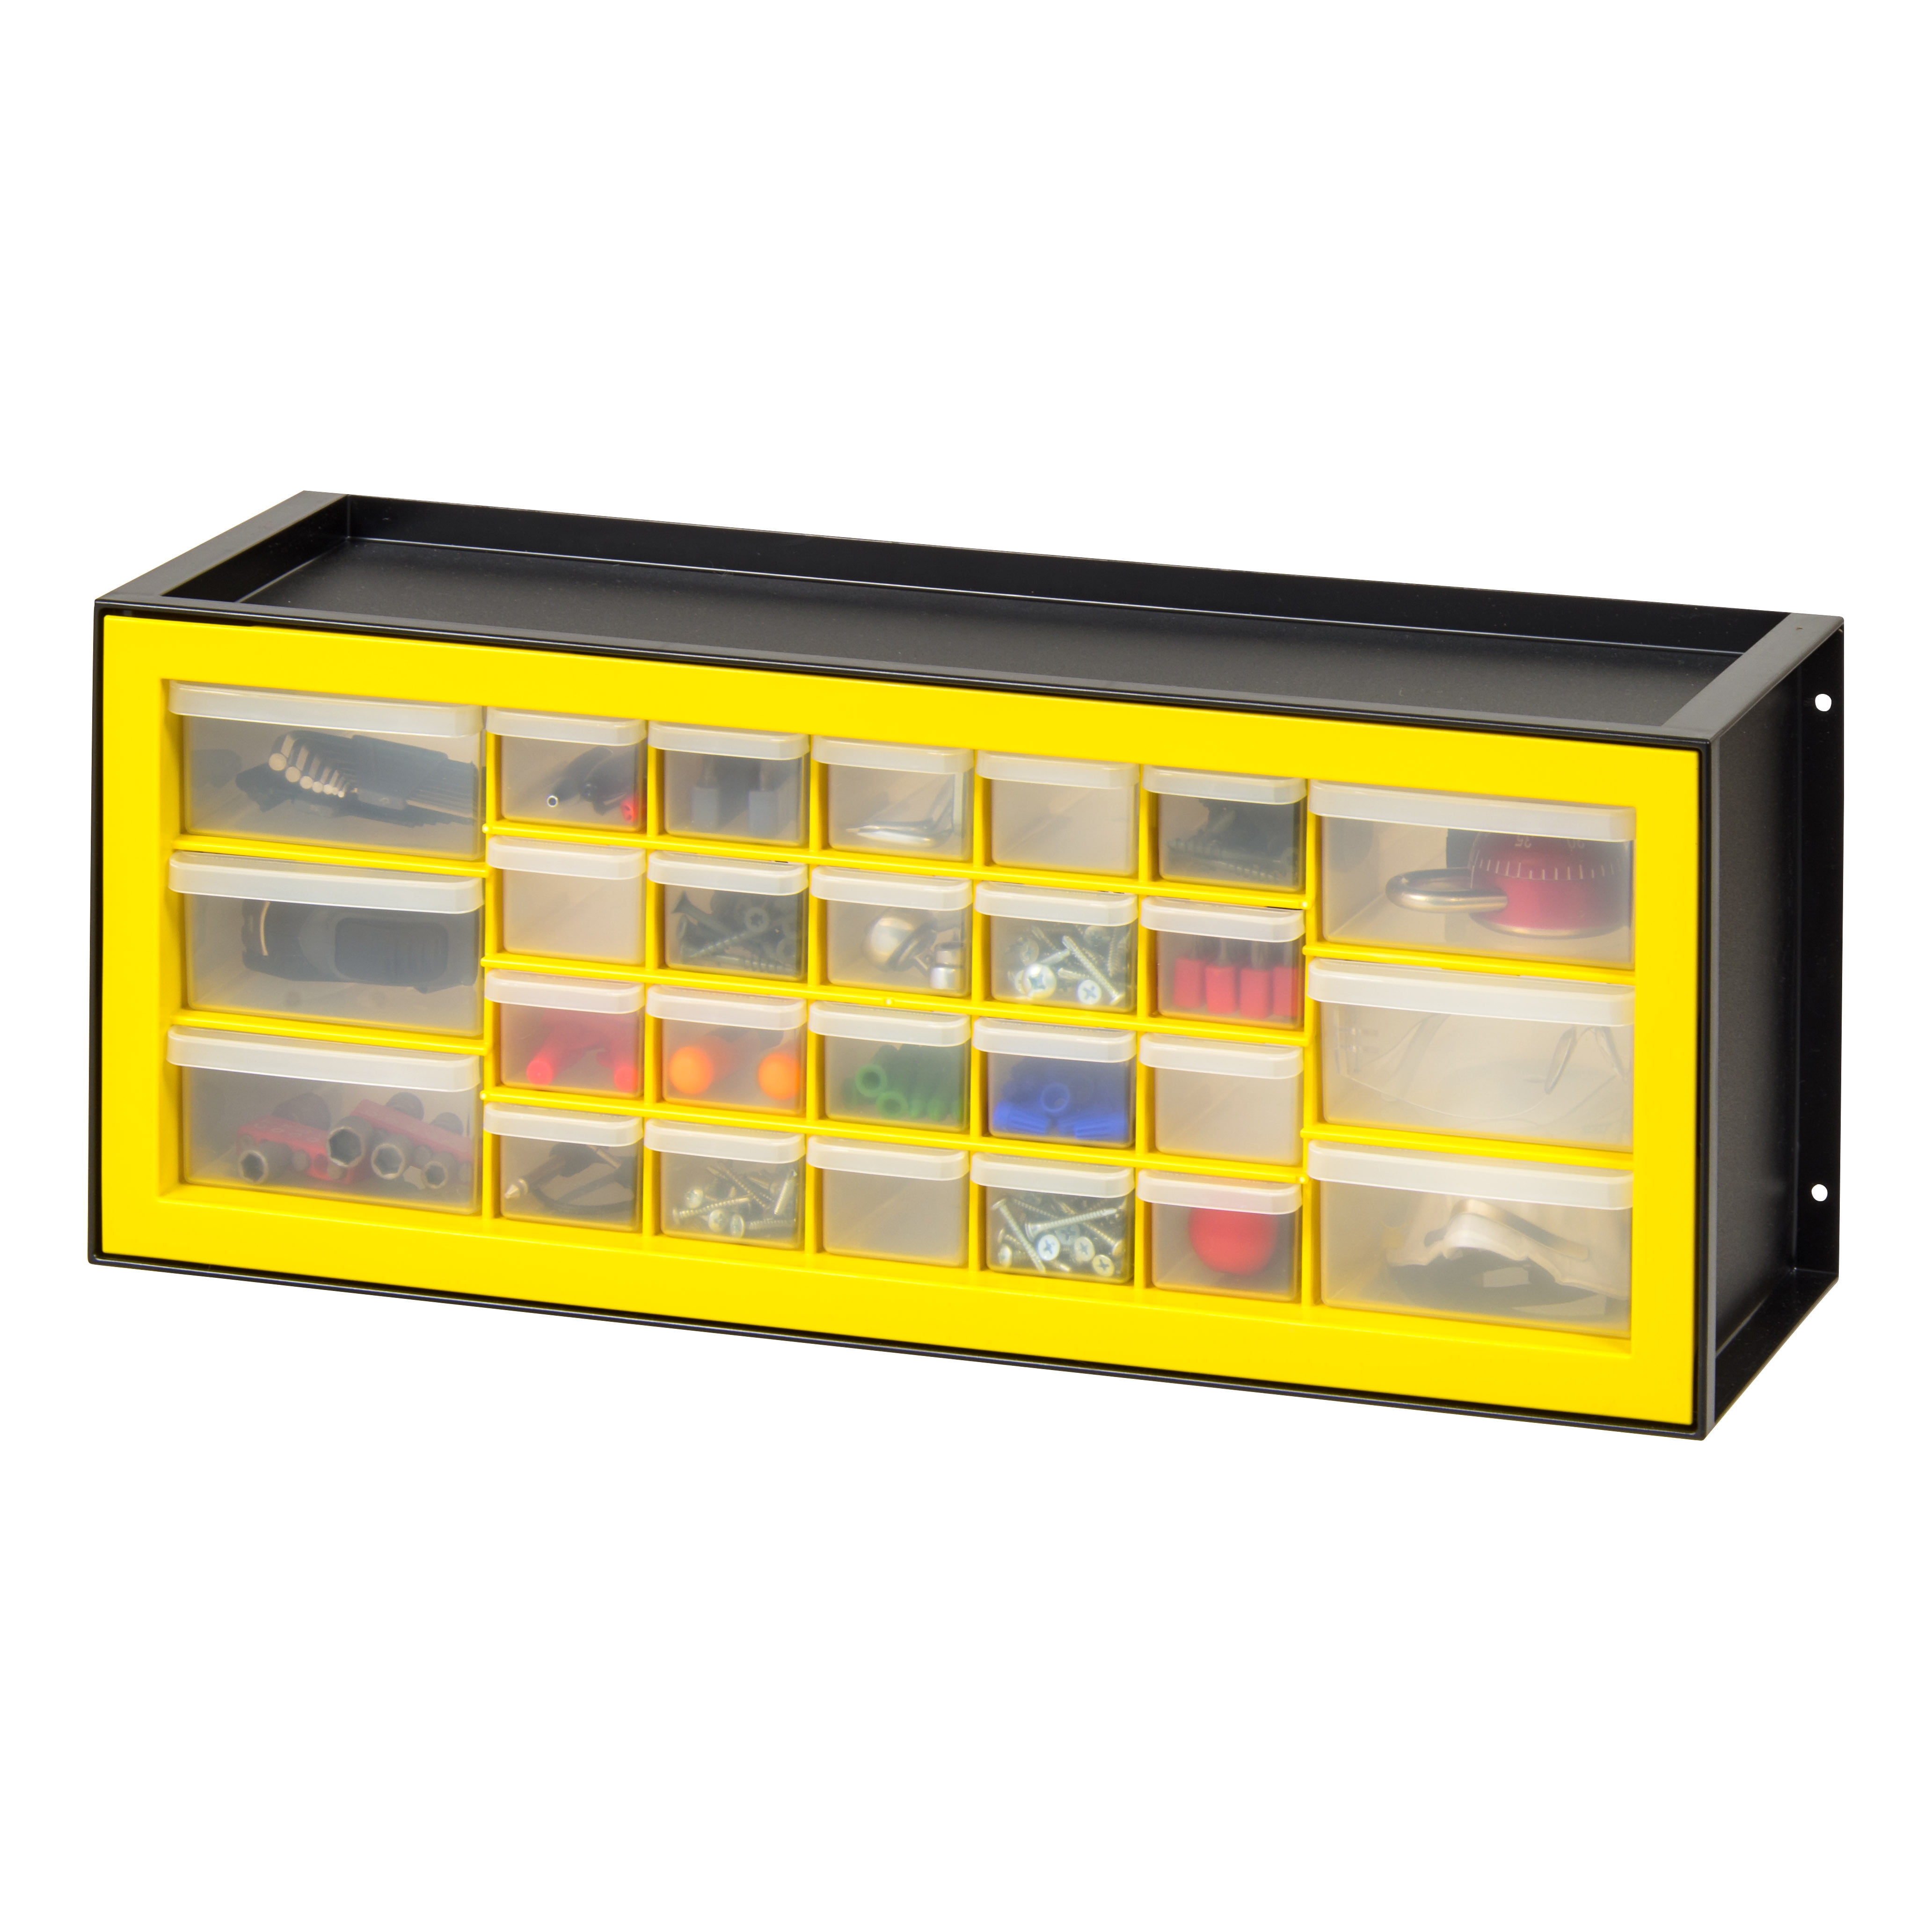 Micro Organizing Boxes - Compatible with Akro-Mils and IRIS USA Plasti